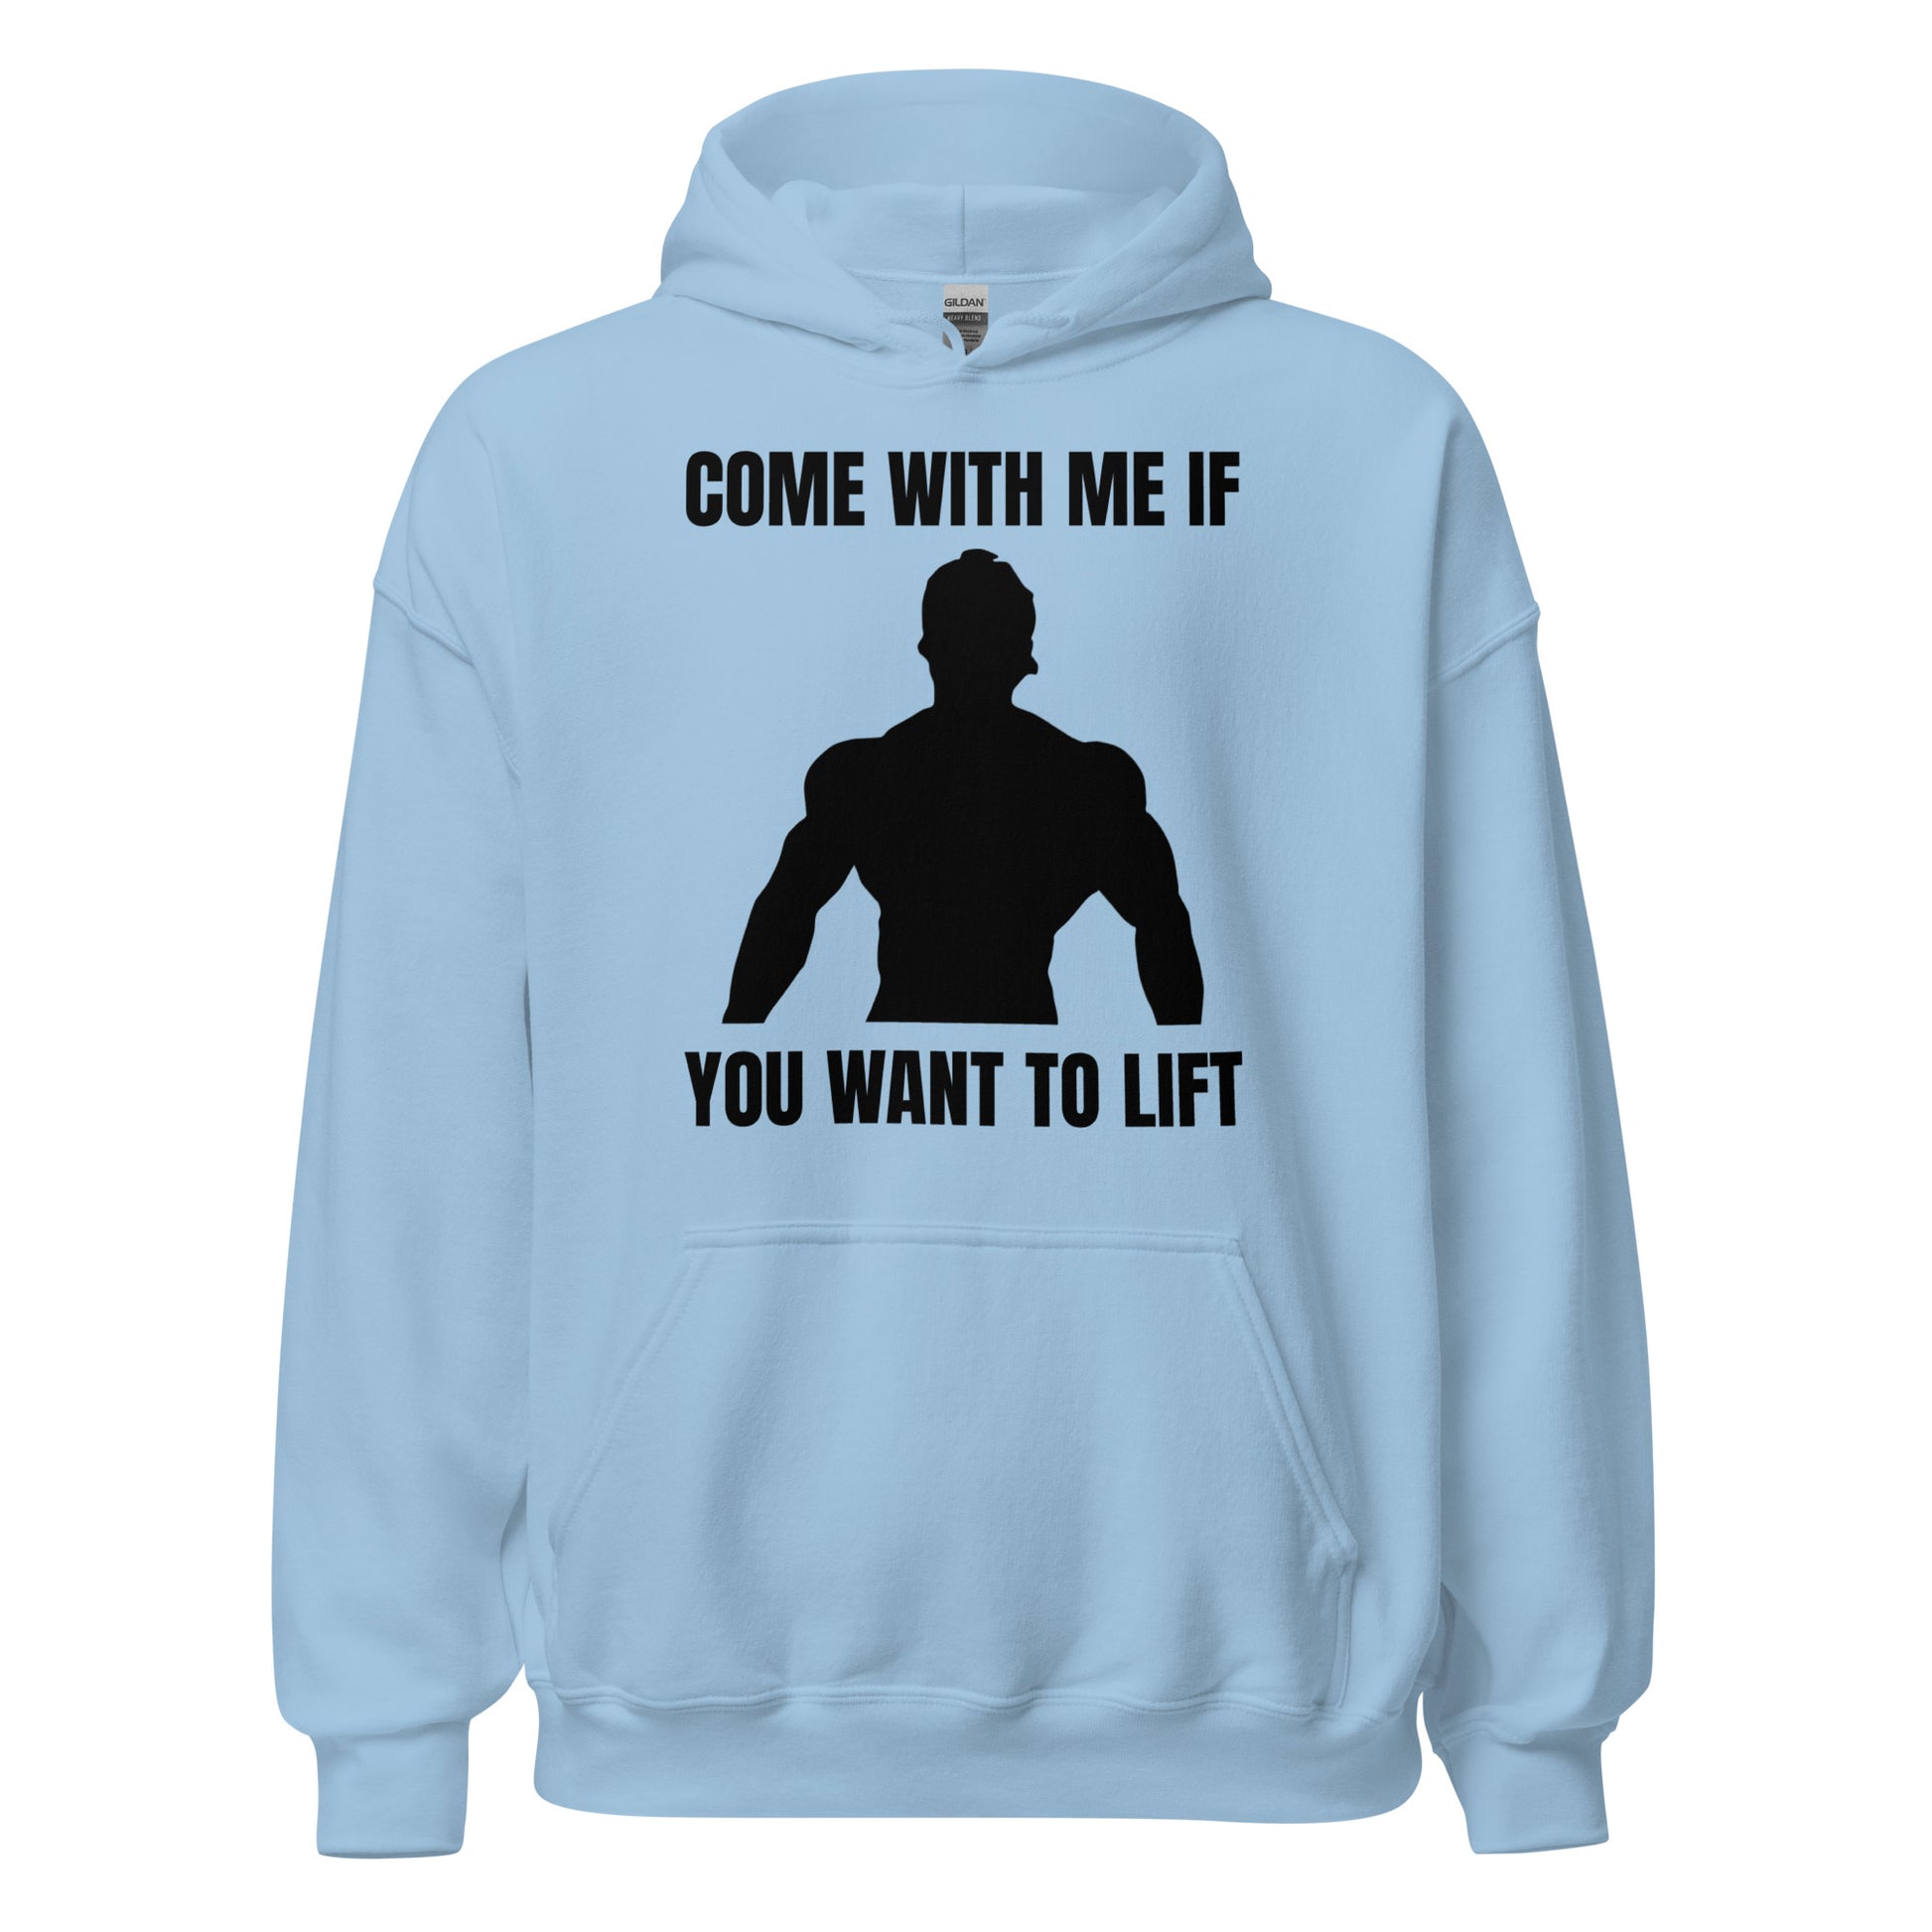 Come with Me if You Want to Lift Hoodie in Light Blue